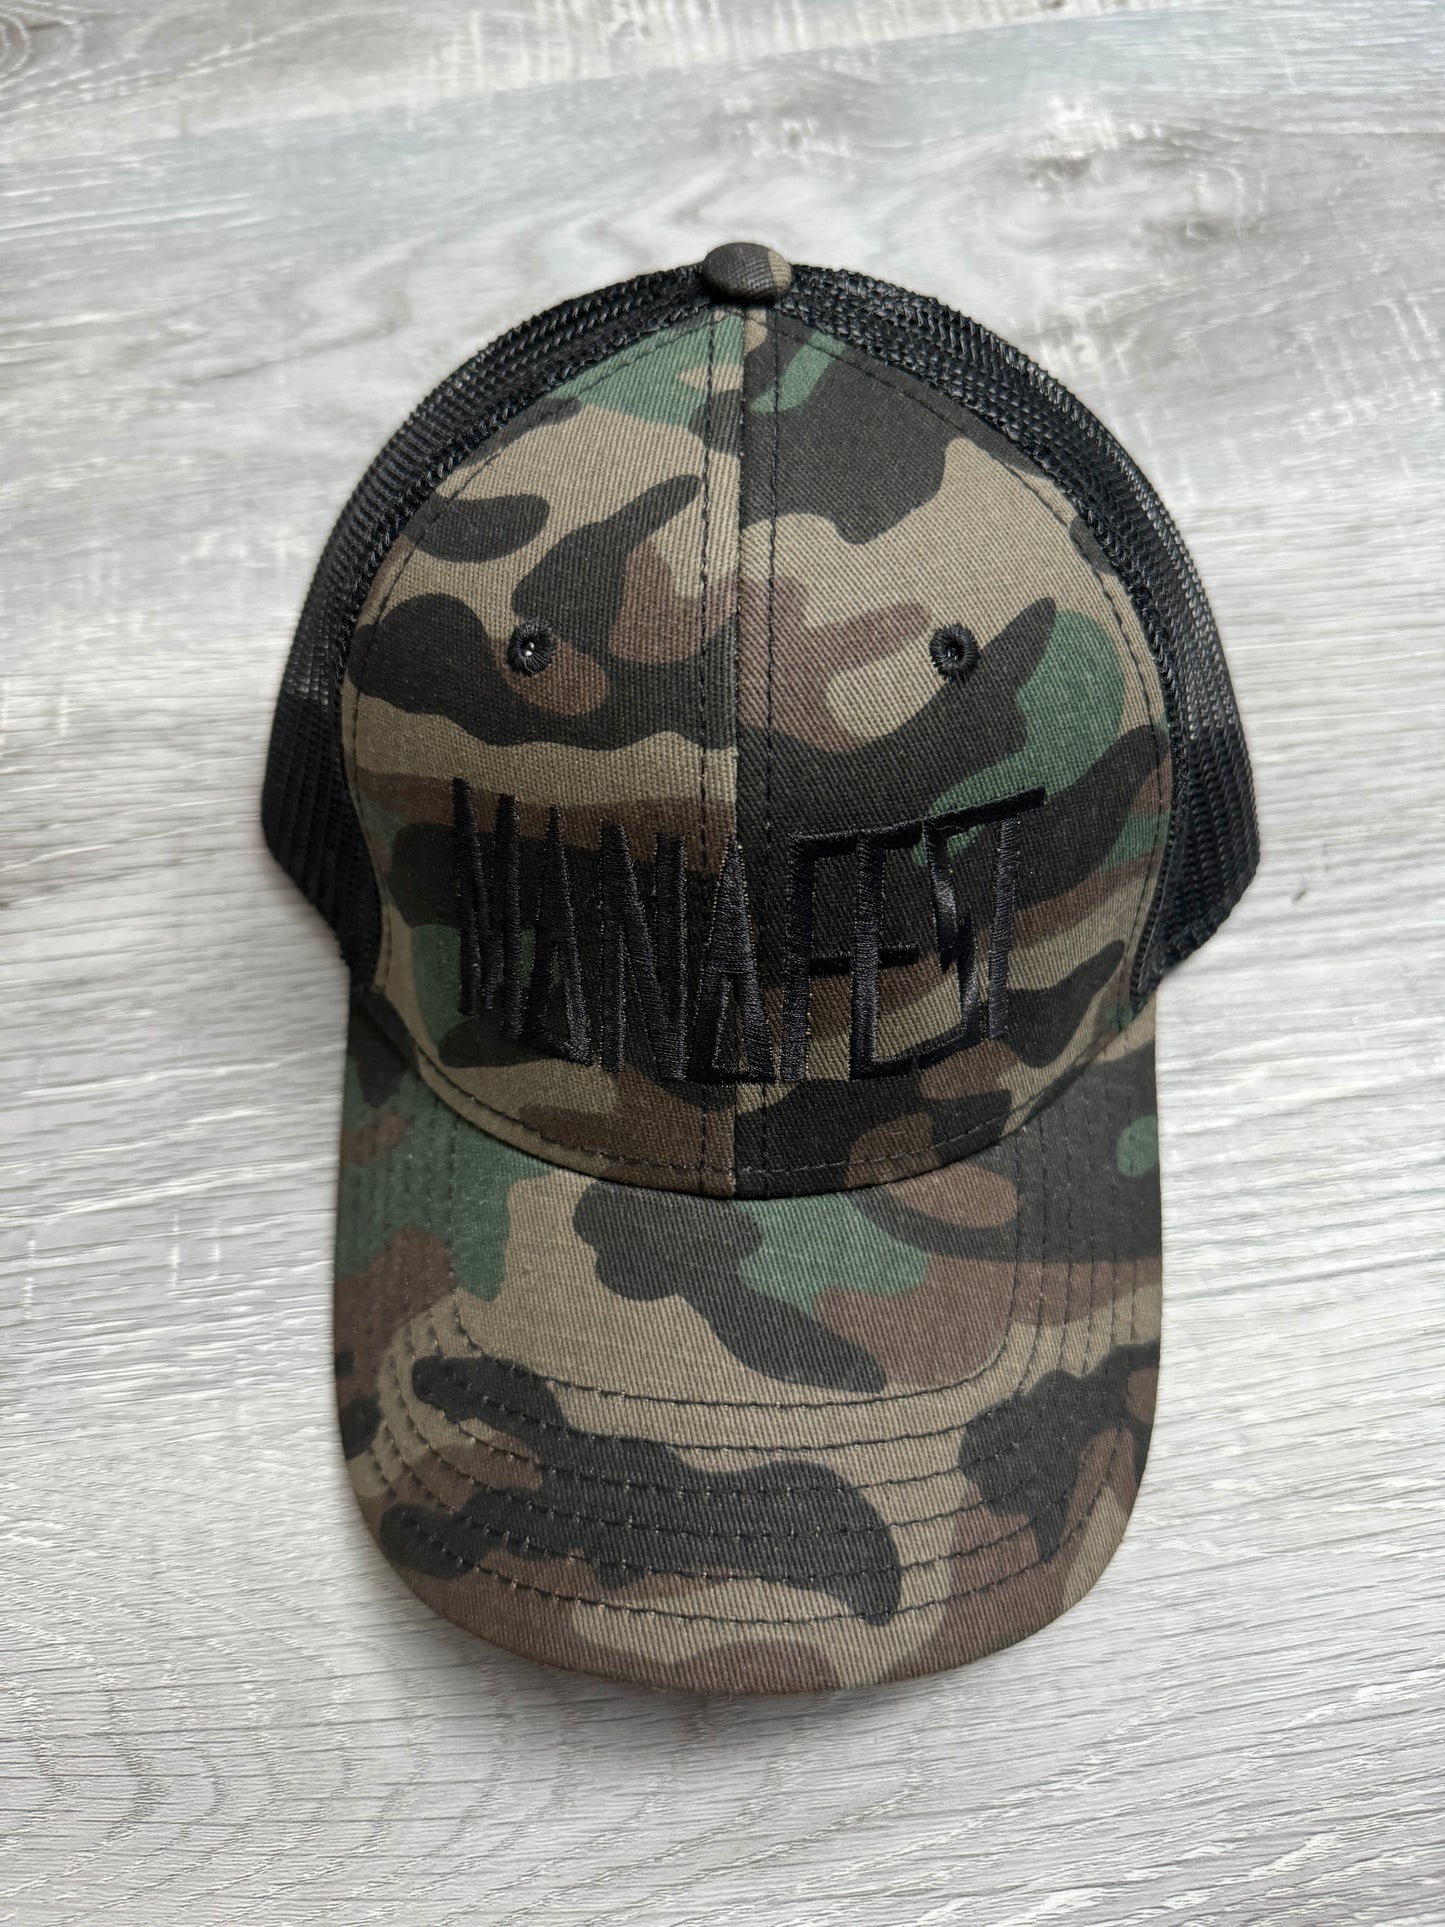 Autographed Camo Black Hat 1 of 1 (Worn by Manafest)